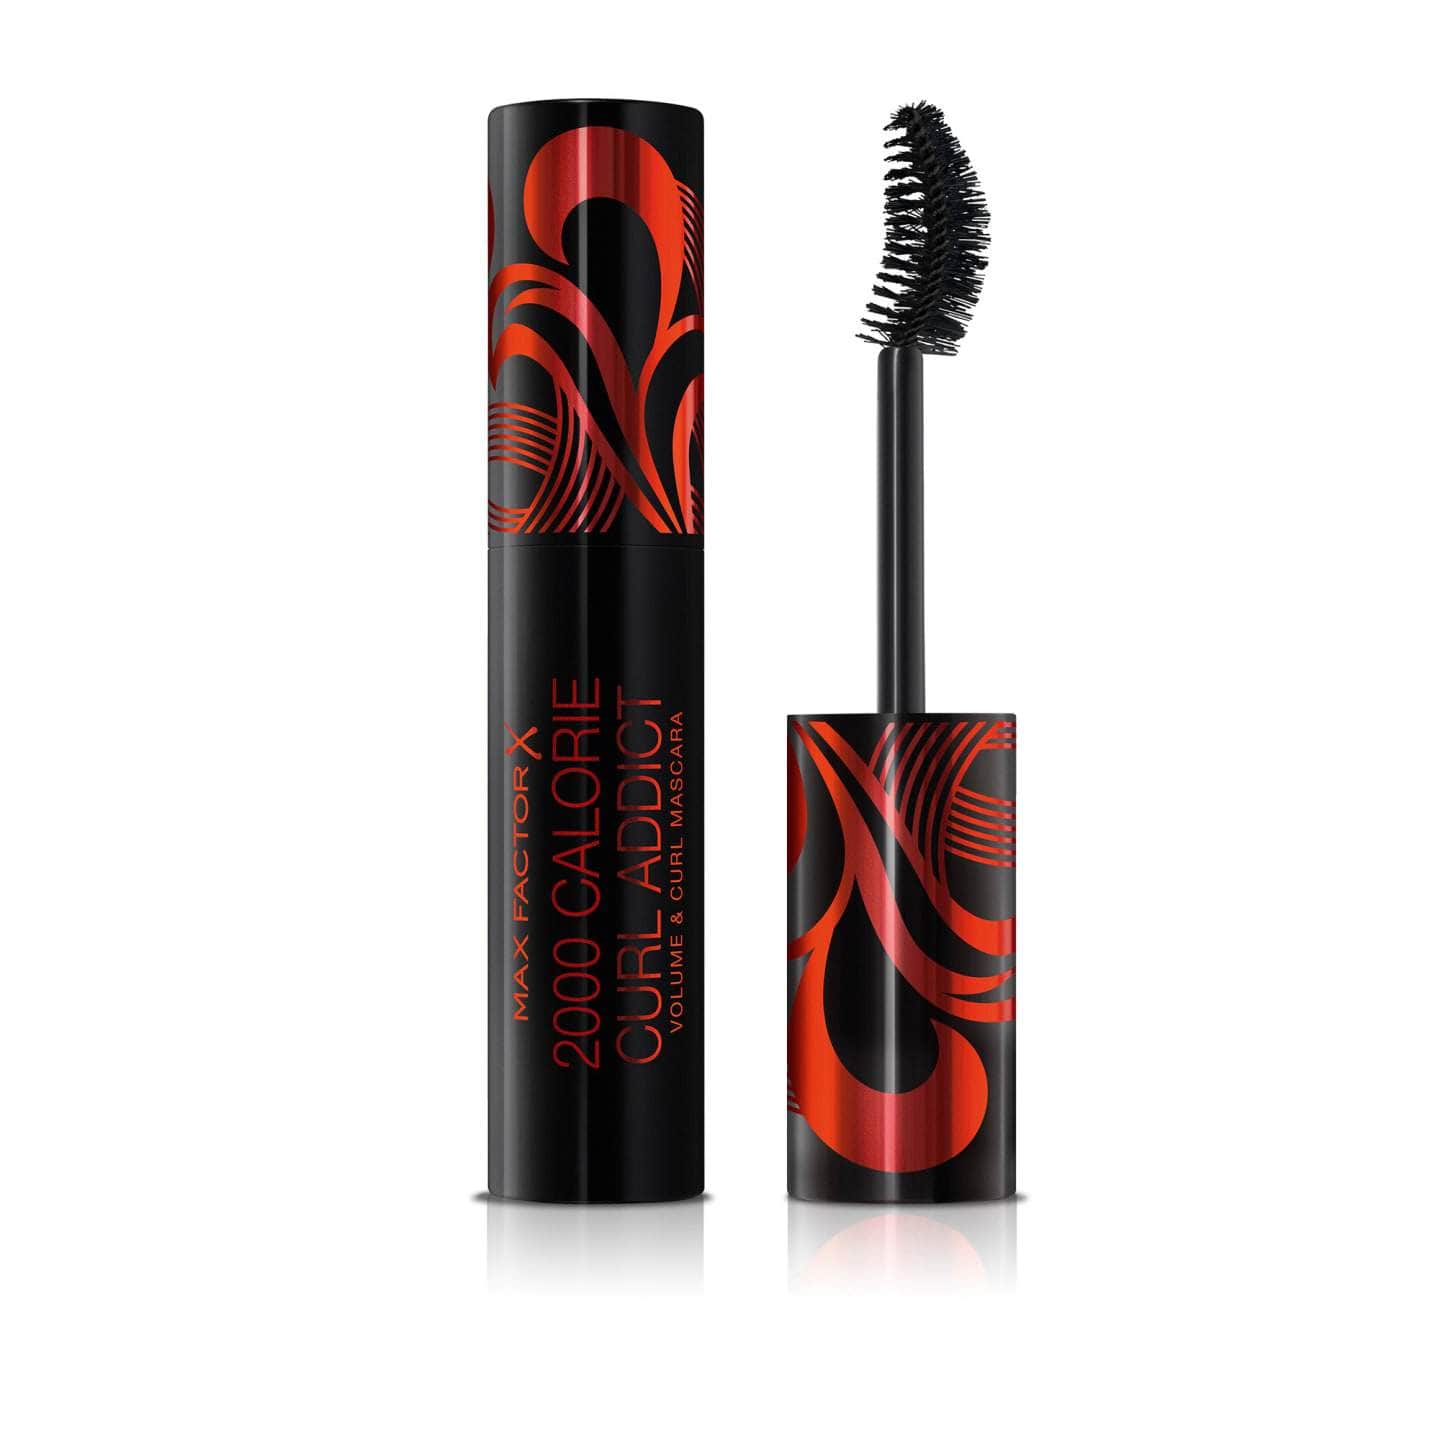 Max Factor 2000 Calorie Curl Addict Mascara - Give Us Beauty